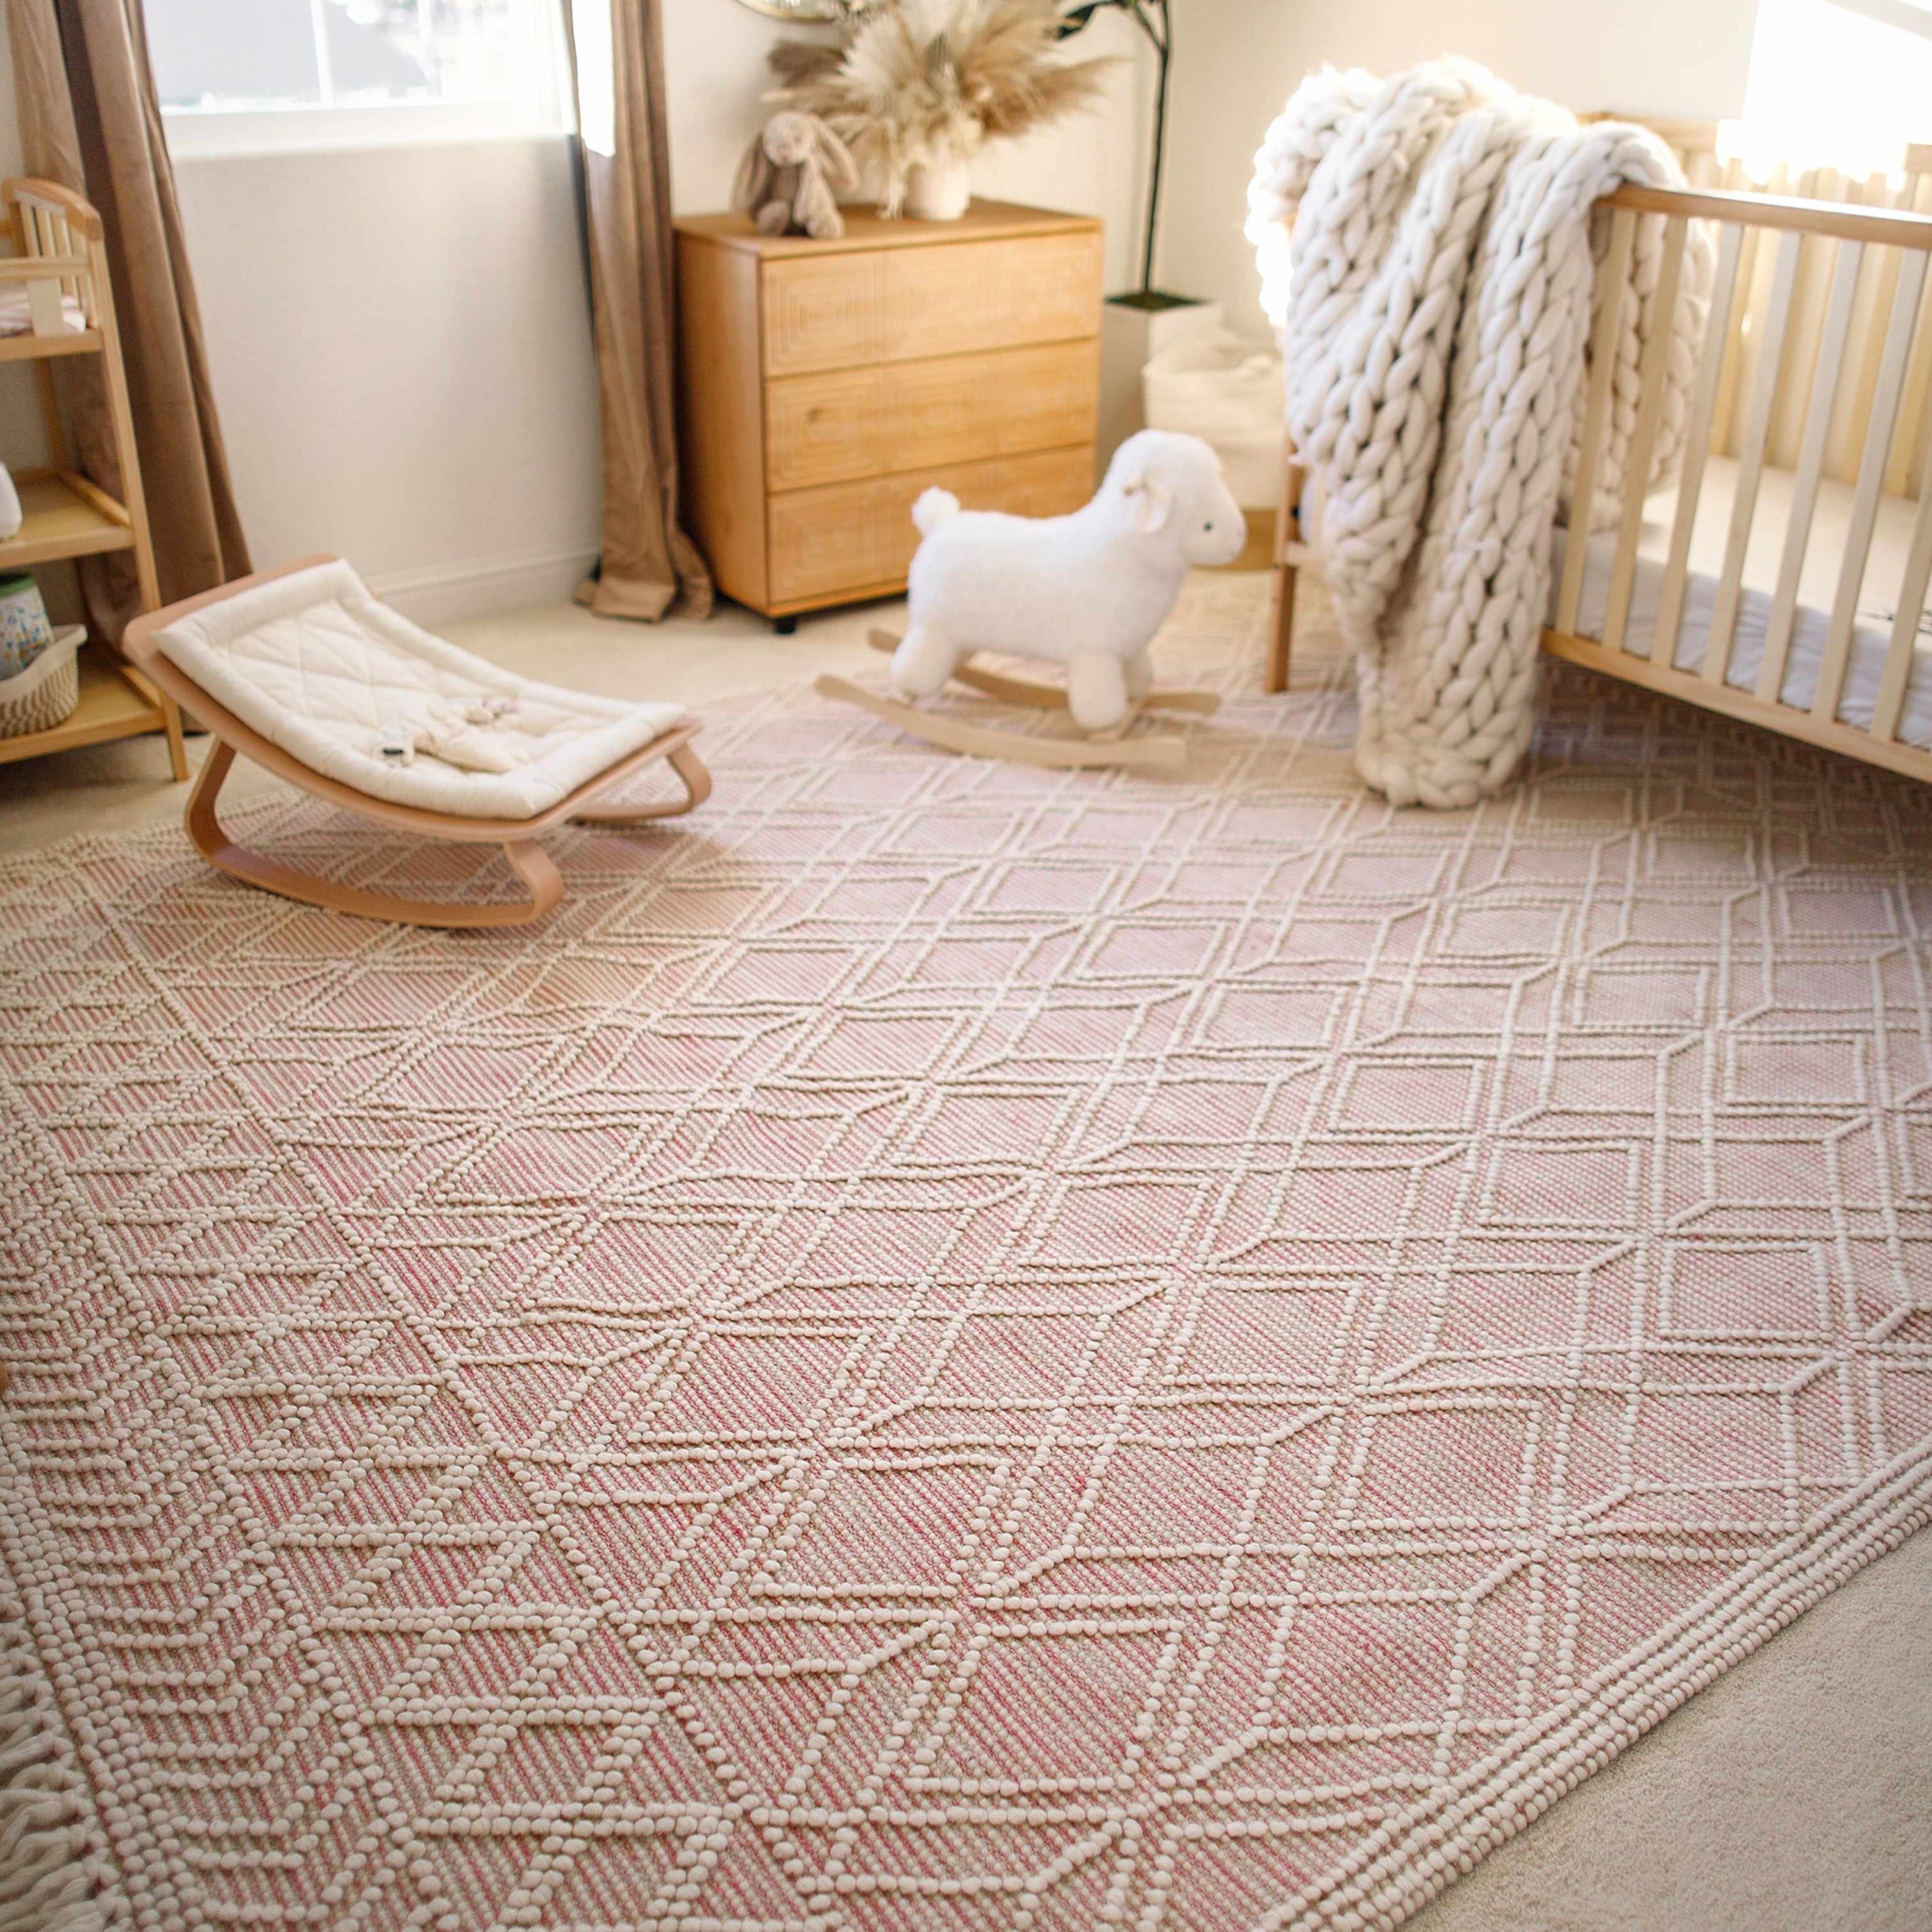 Buy Oval Rugs in Canada at Discounted Prices